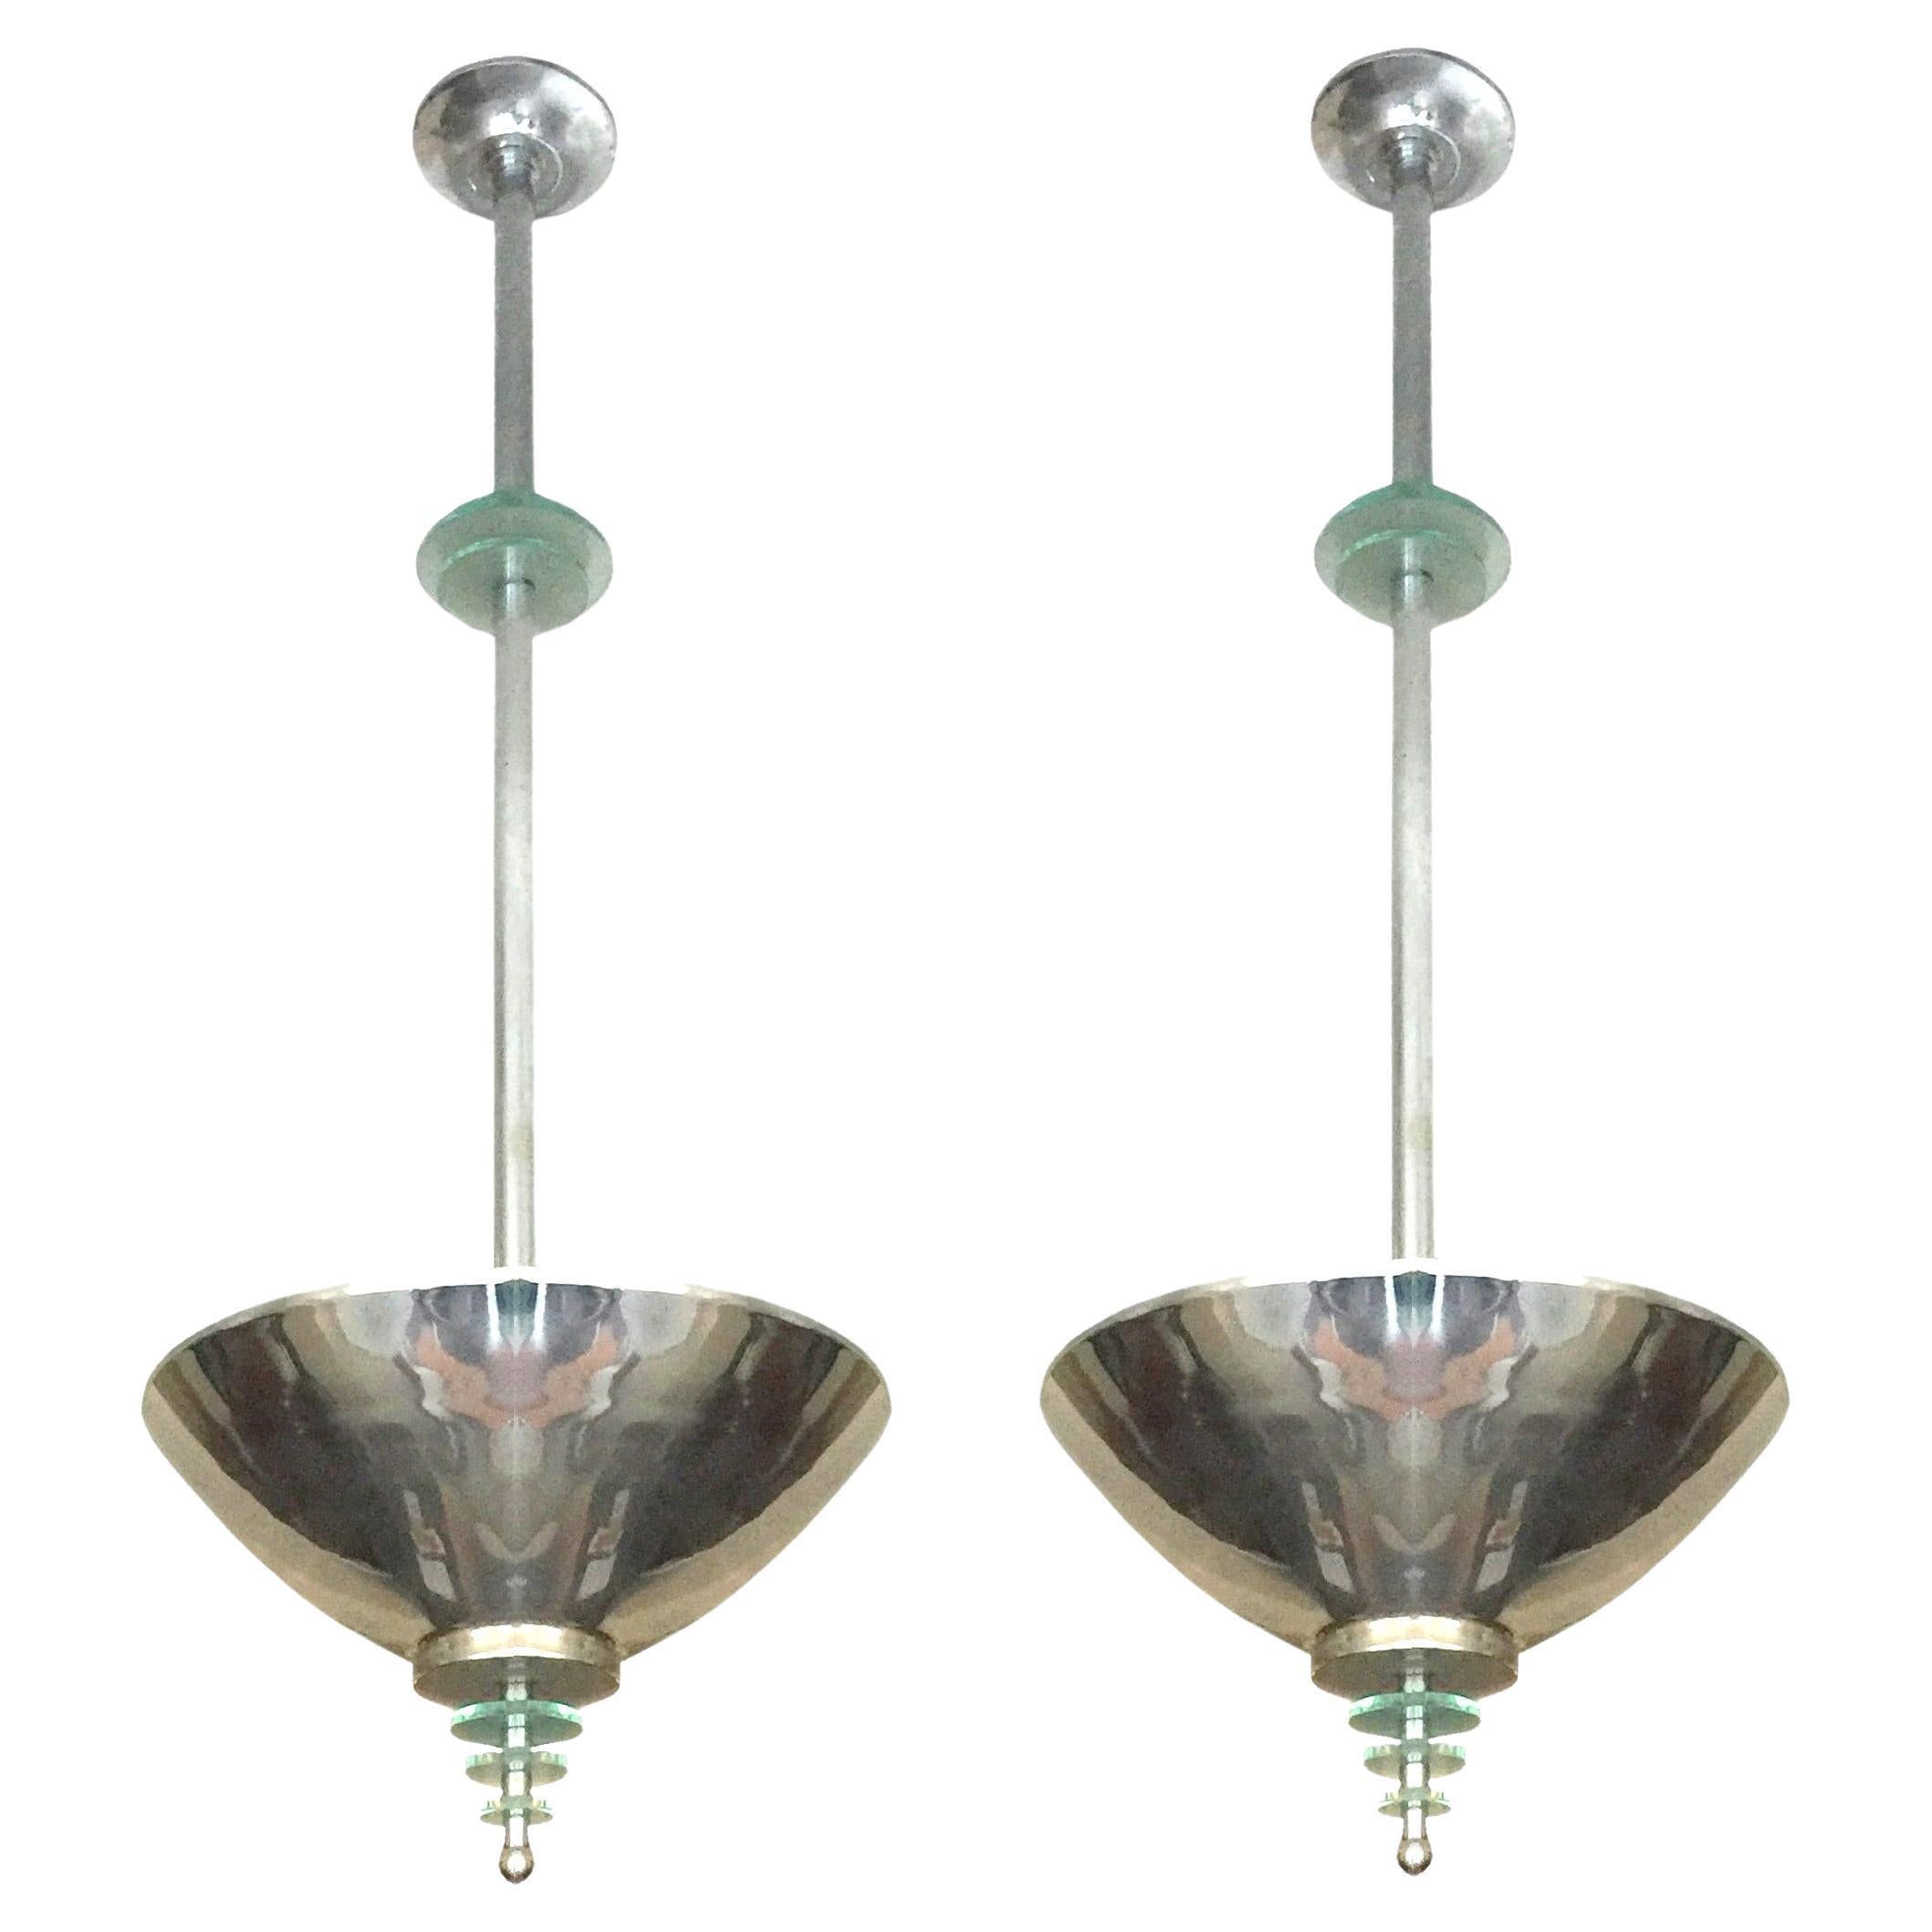 Amaizing Pair of Art Deco Chandeliers in Glass and Chrome, Style, 1935 For Sale